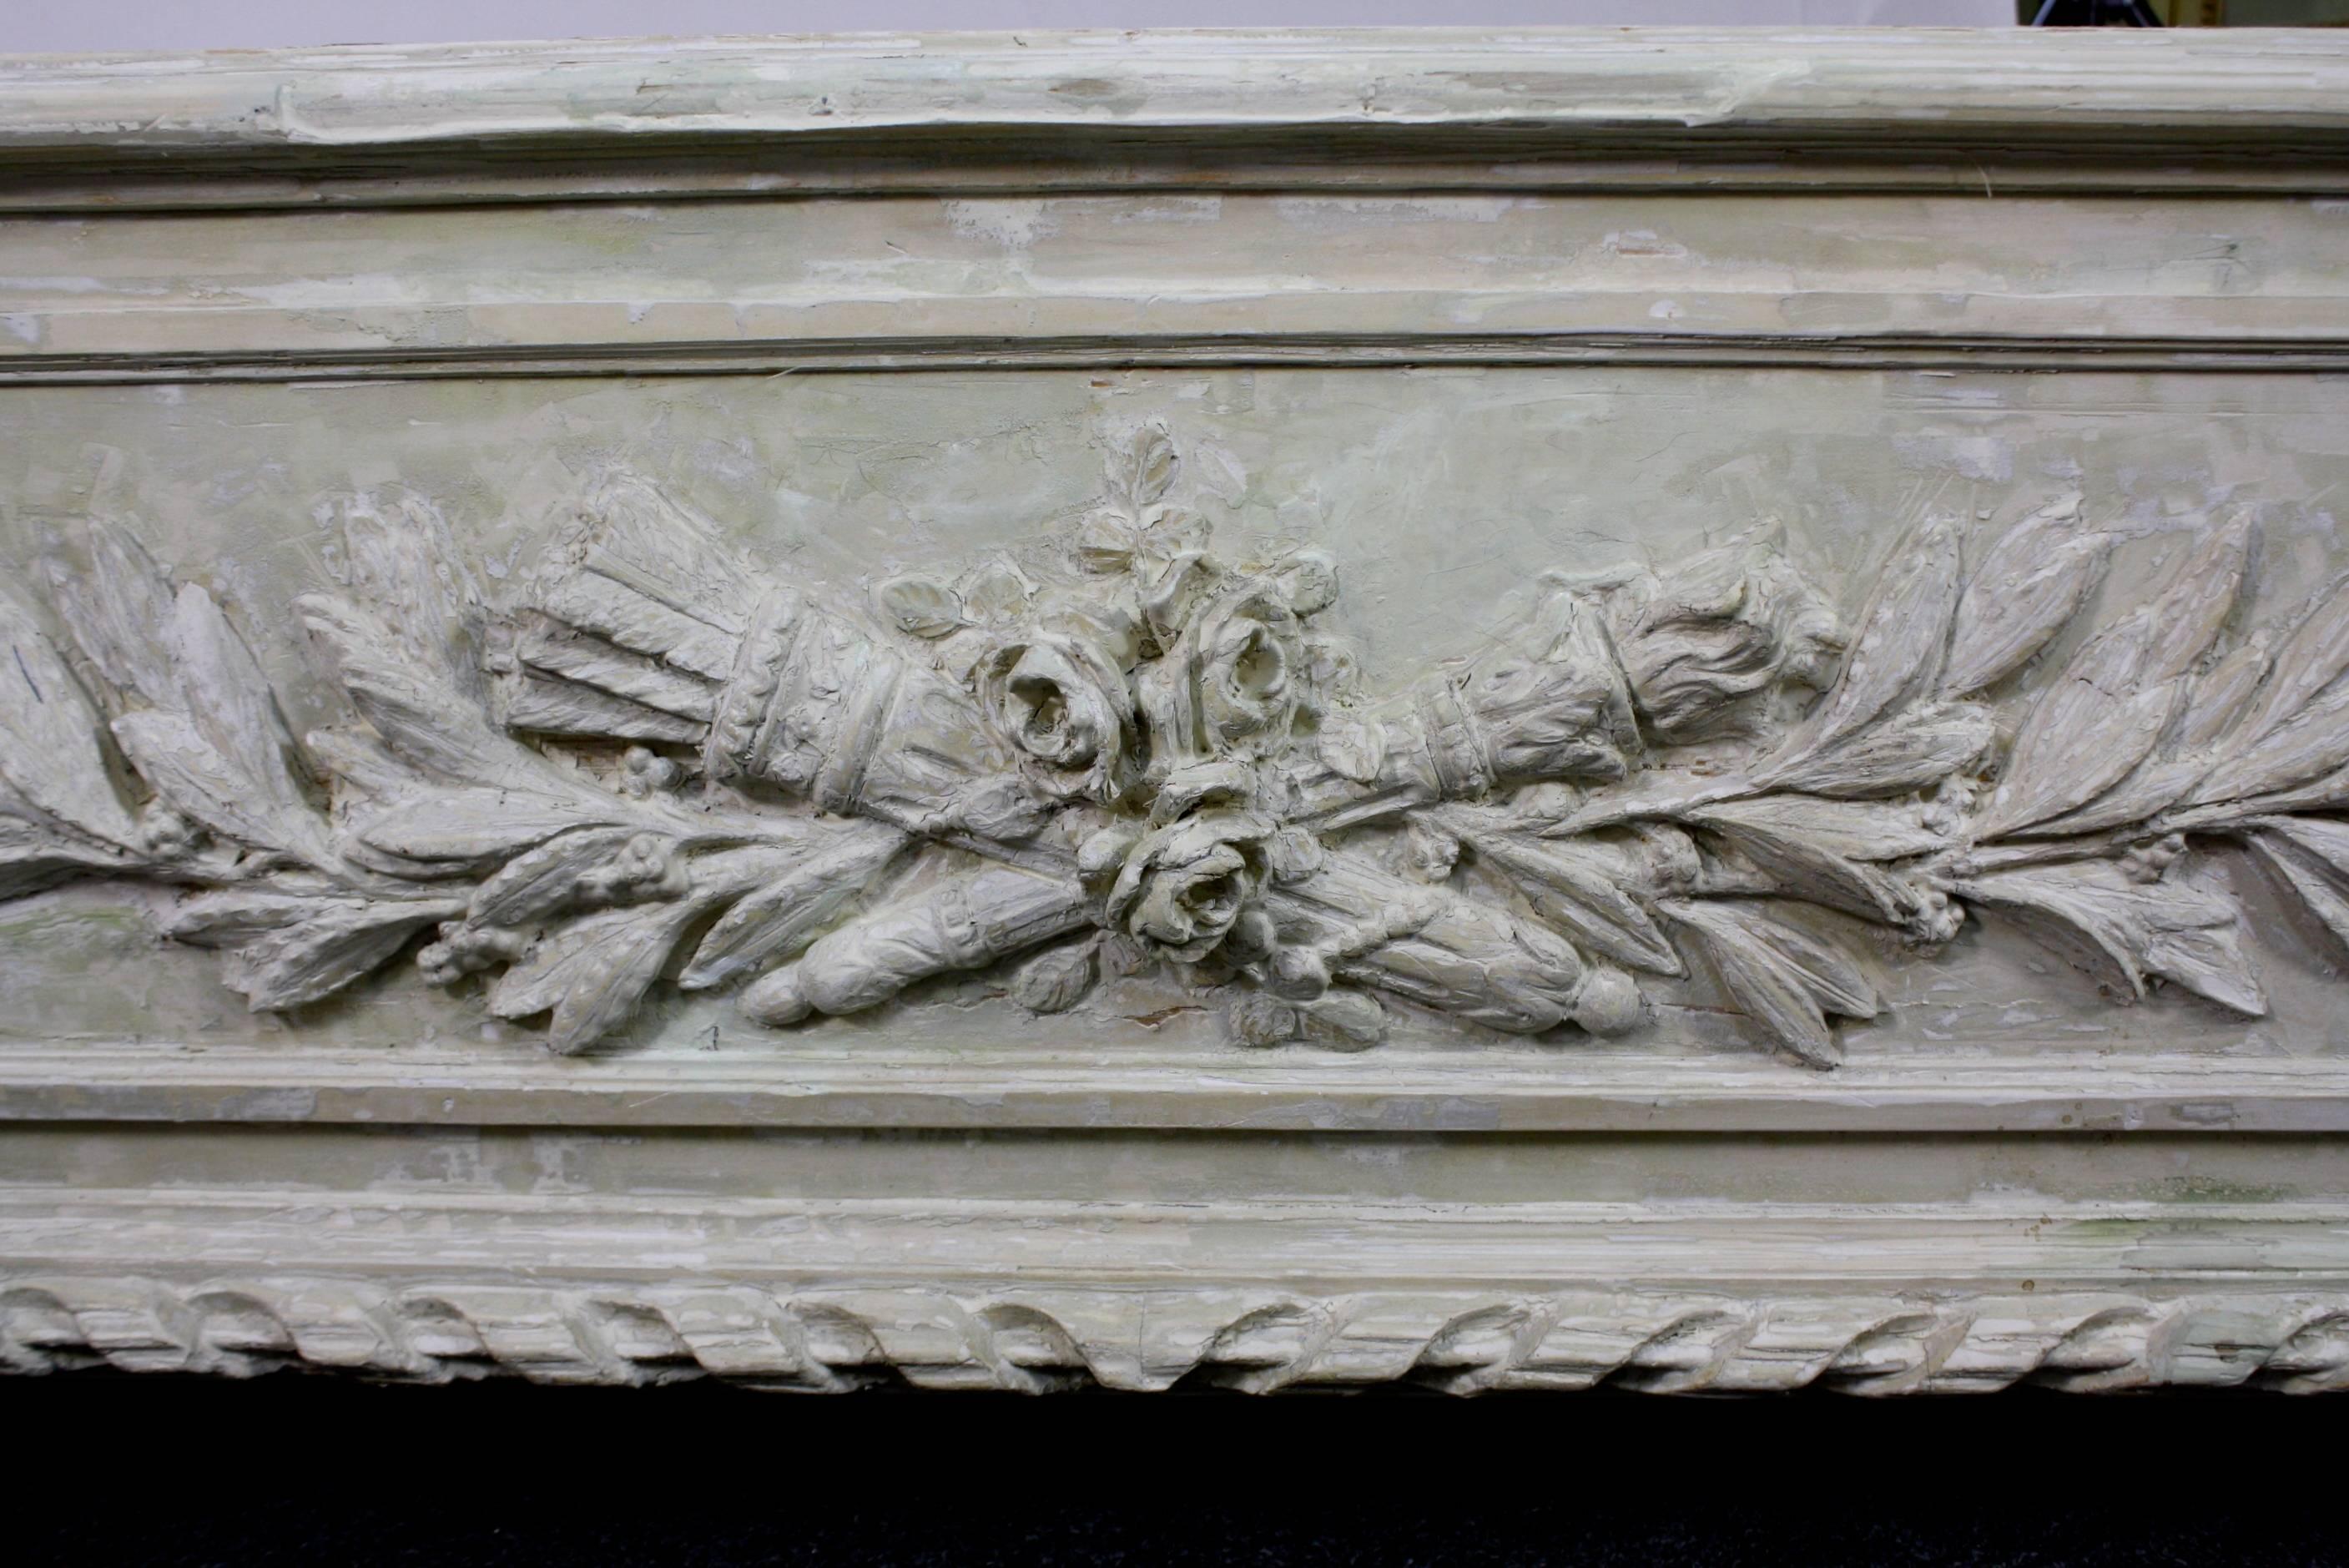 Large Painted and Carved Wood Neoclassical Planter For Sale 1